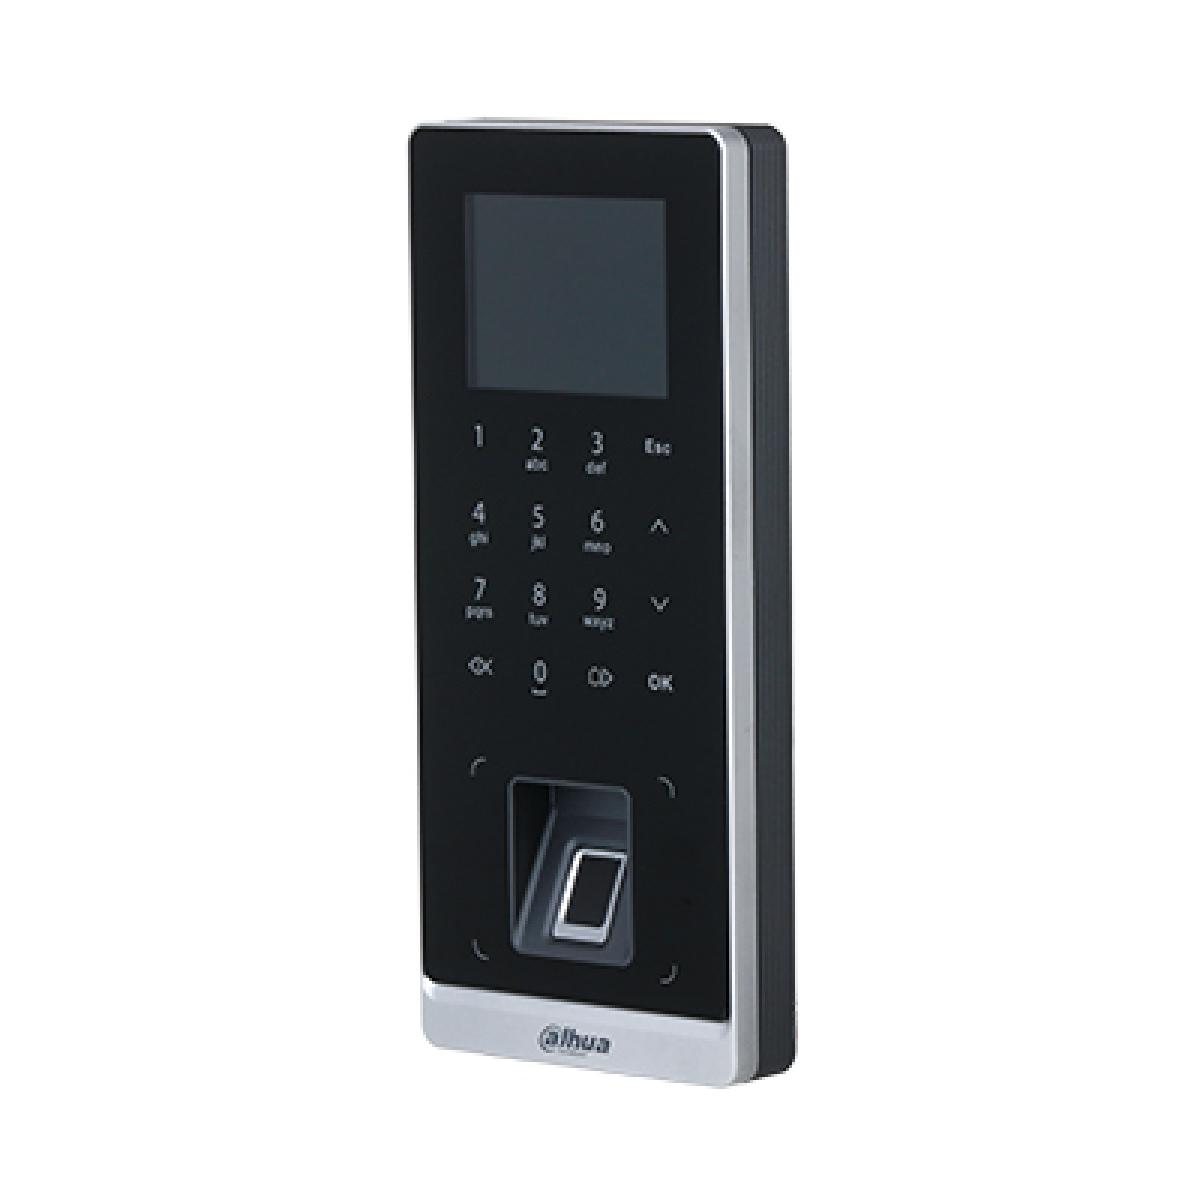 Dahua ASI2212H-DW Fingerprint and Password Entry Device Independent Access